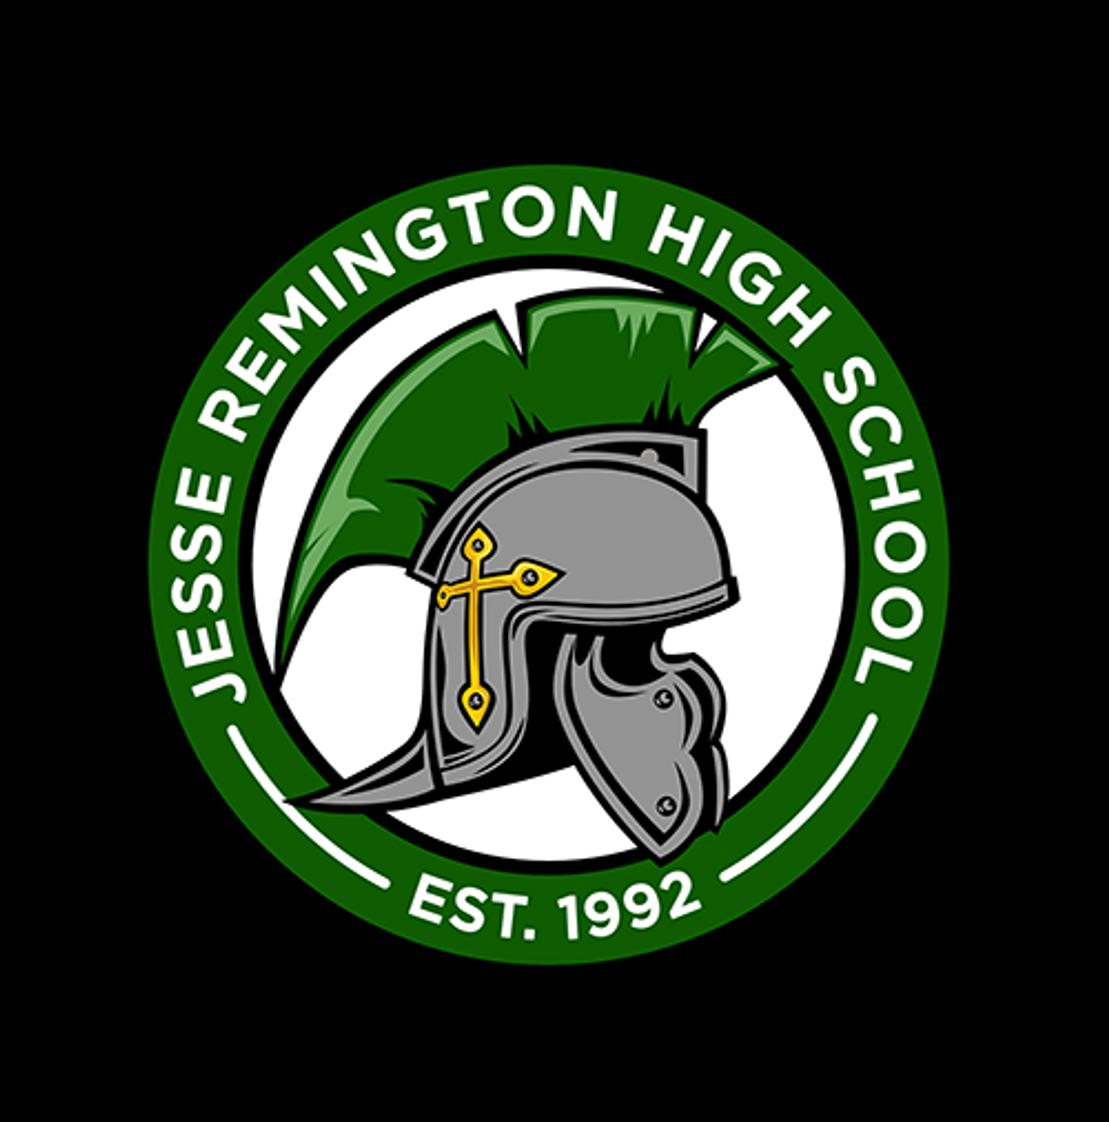 Jesse Remington High School Photo - Founded in 1992, JRHS is a regional 9-12 Christian high school, featuring both college and career preparatory programs, exemplified in our traditional and project curricula. Our motto, "we are more than conquerors" permeates the spiritual, intellectual, social and aesthetic pursuits of JRHS.